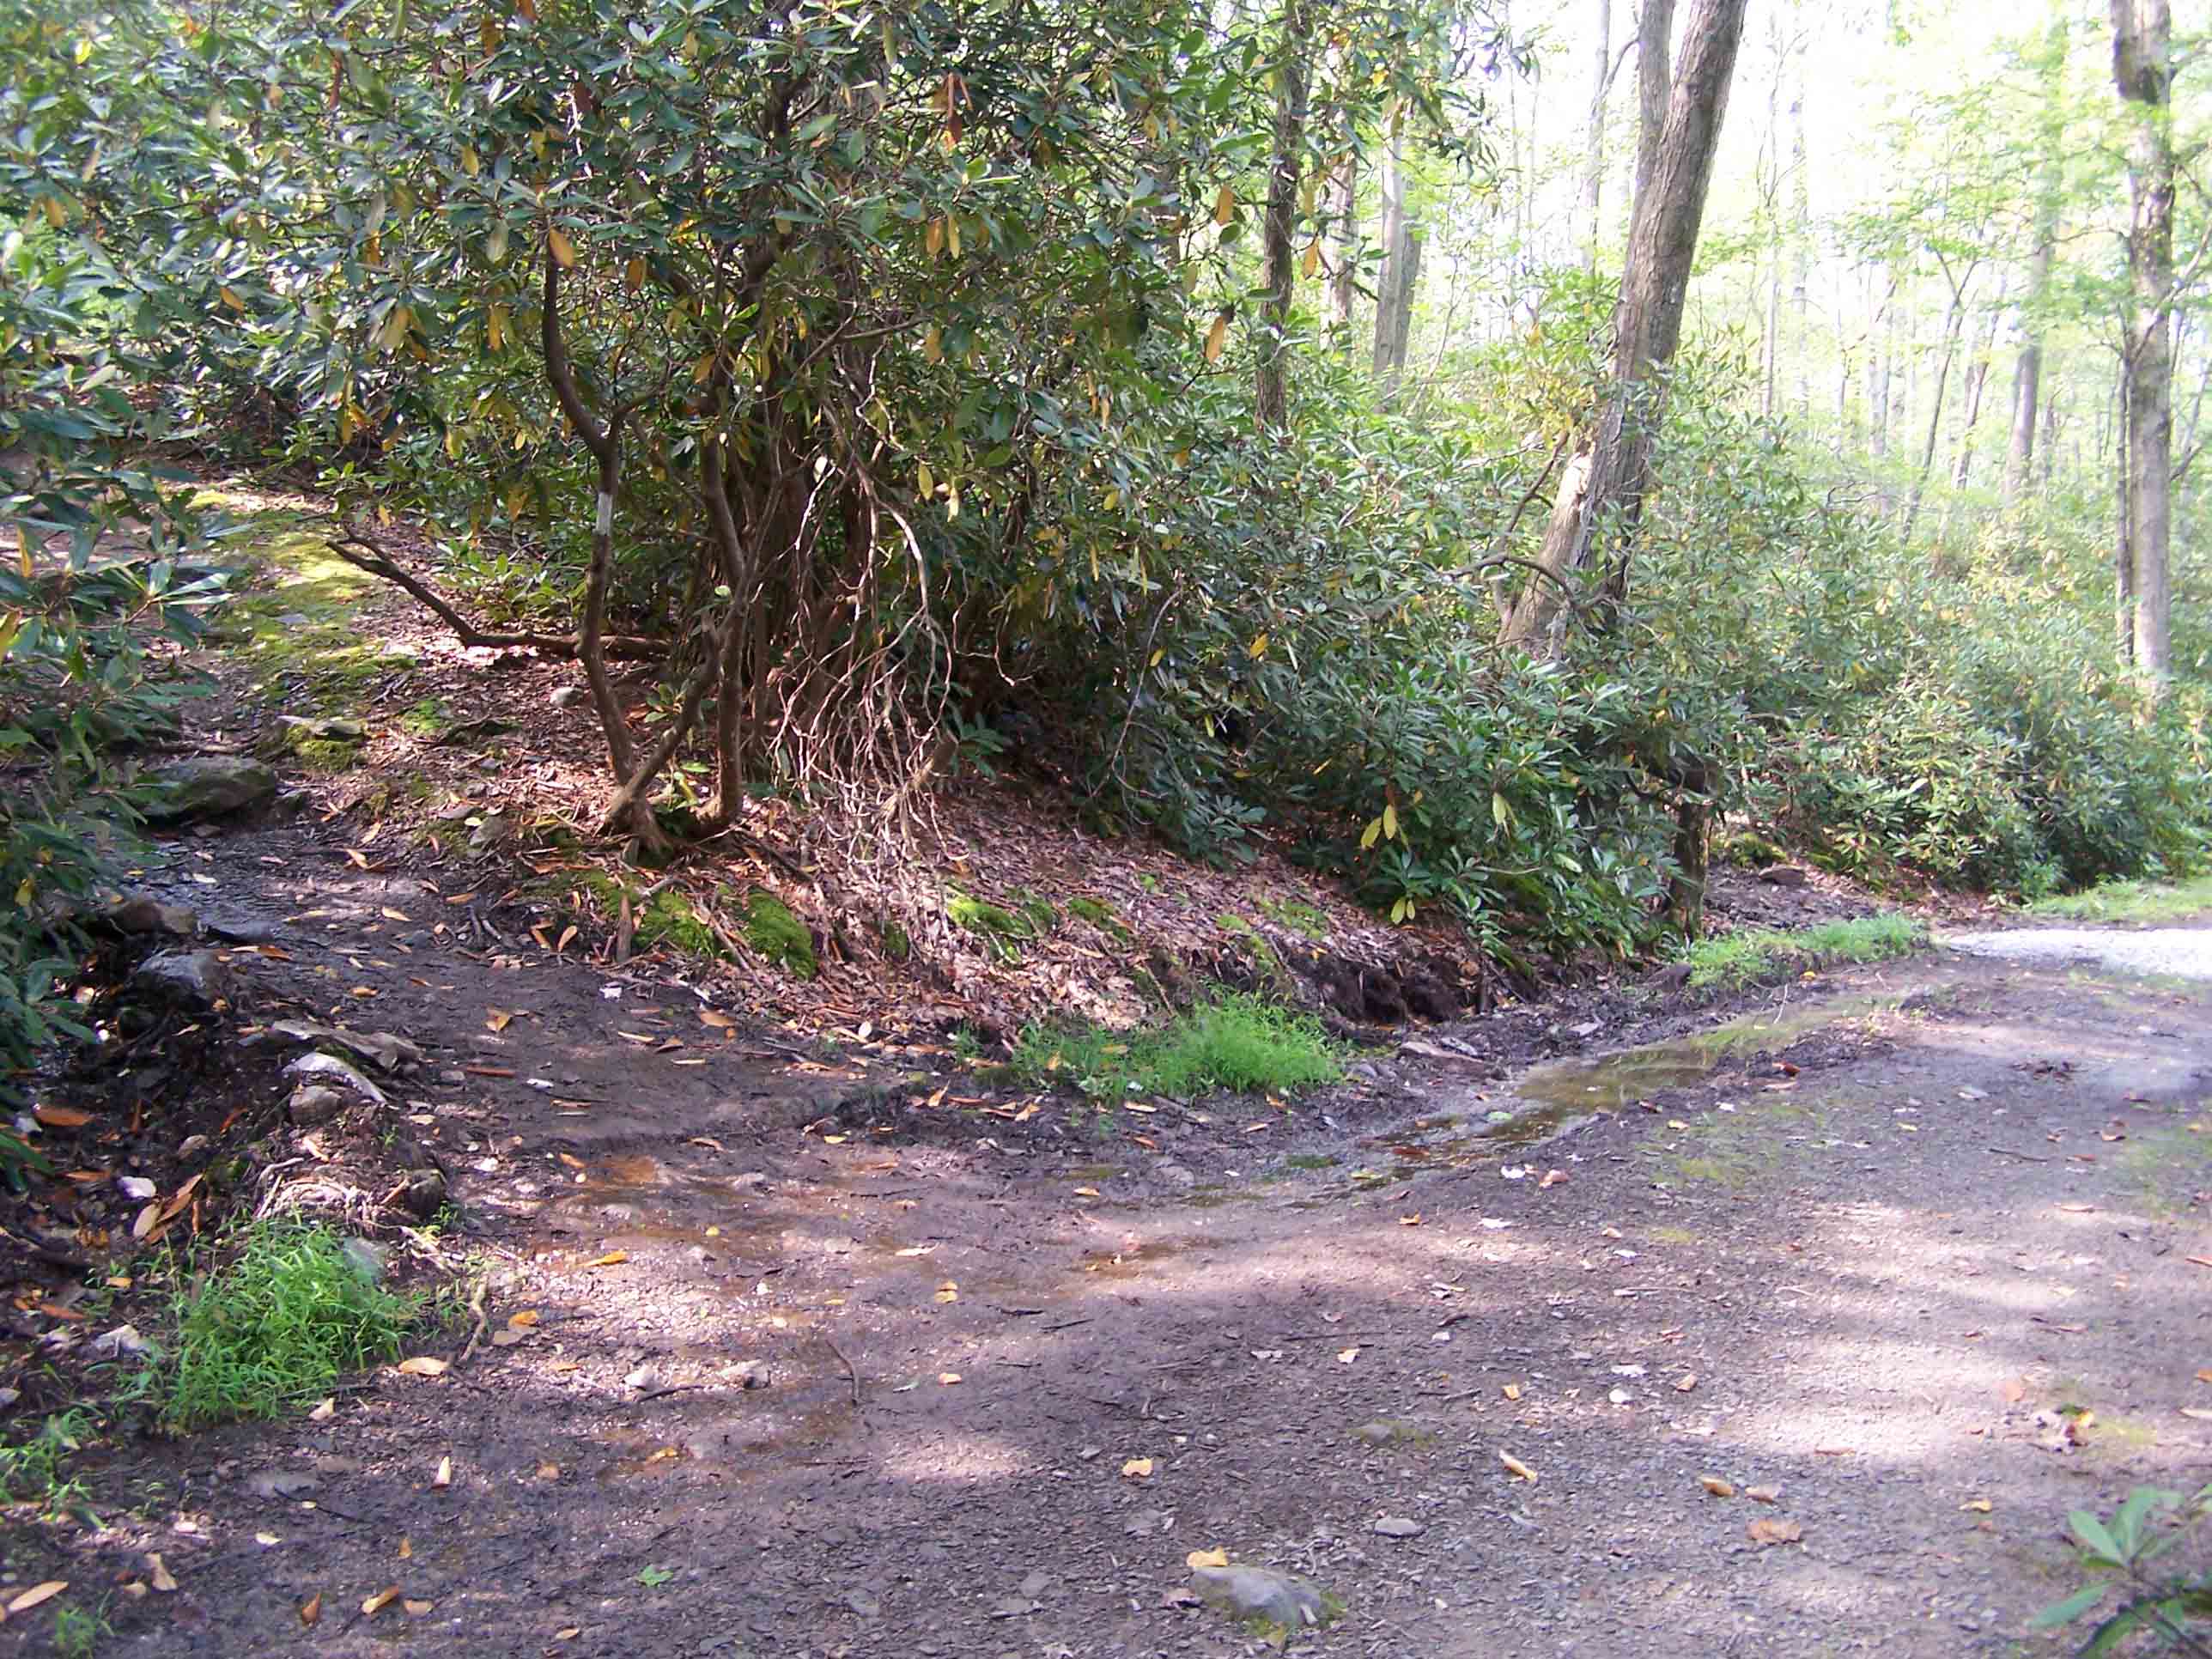 mm 0.4 Leave gravel road and ascend through a rhododendron thicket. Courtesy at@rohland.org